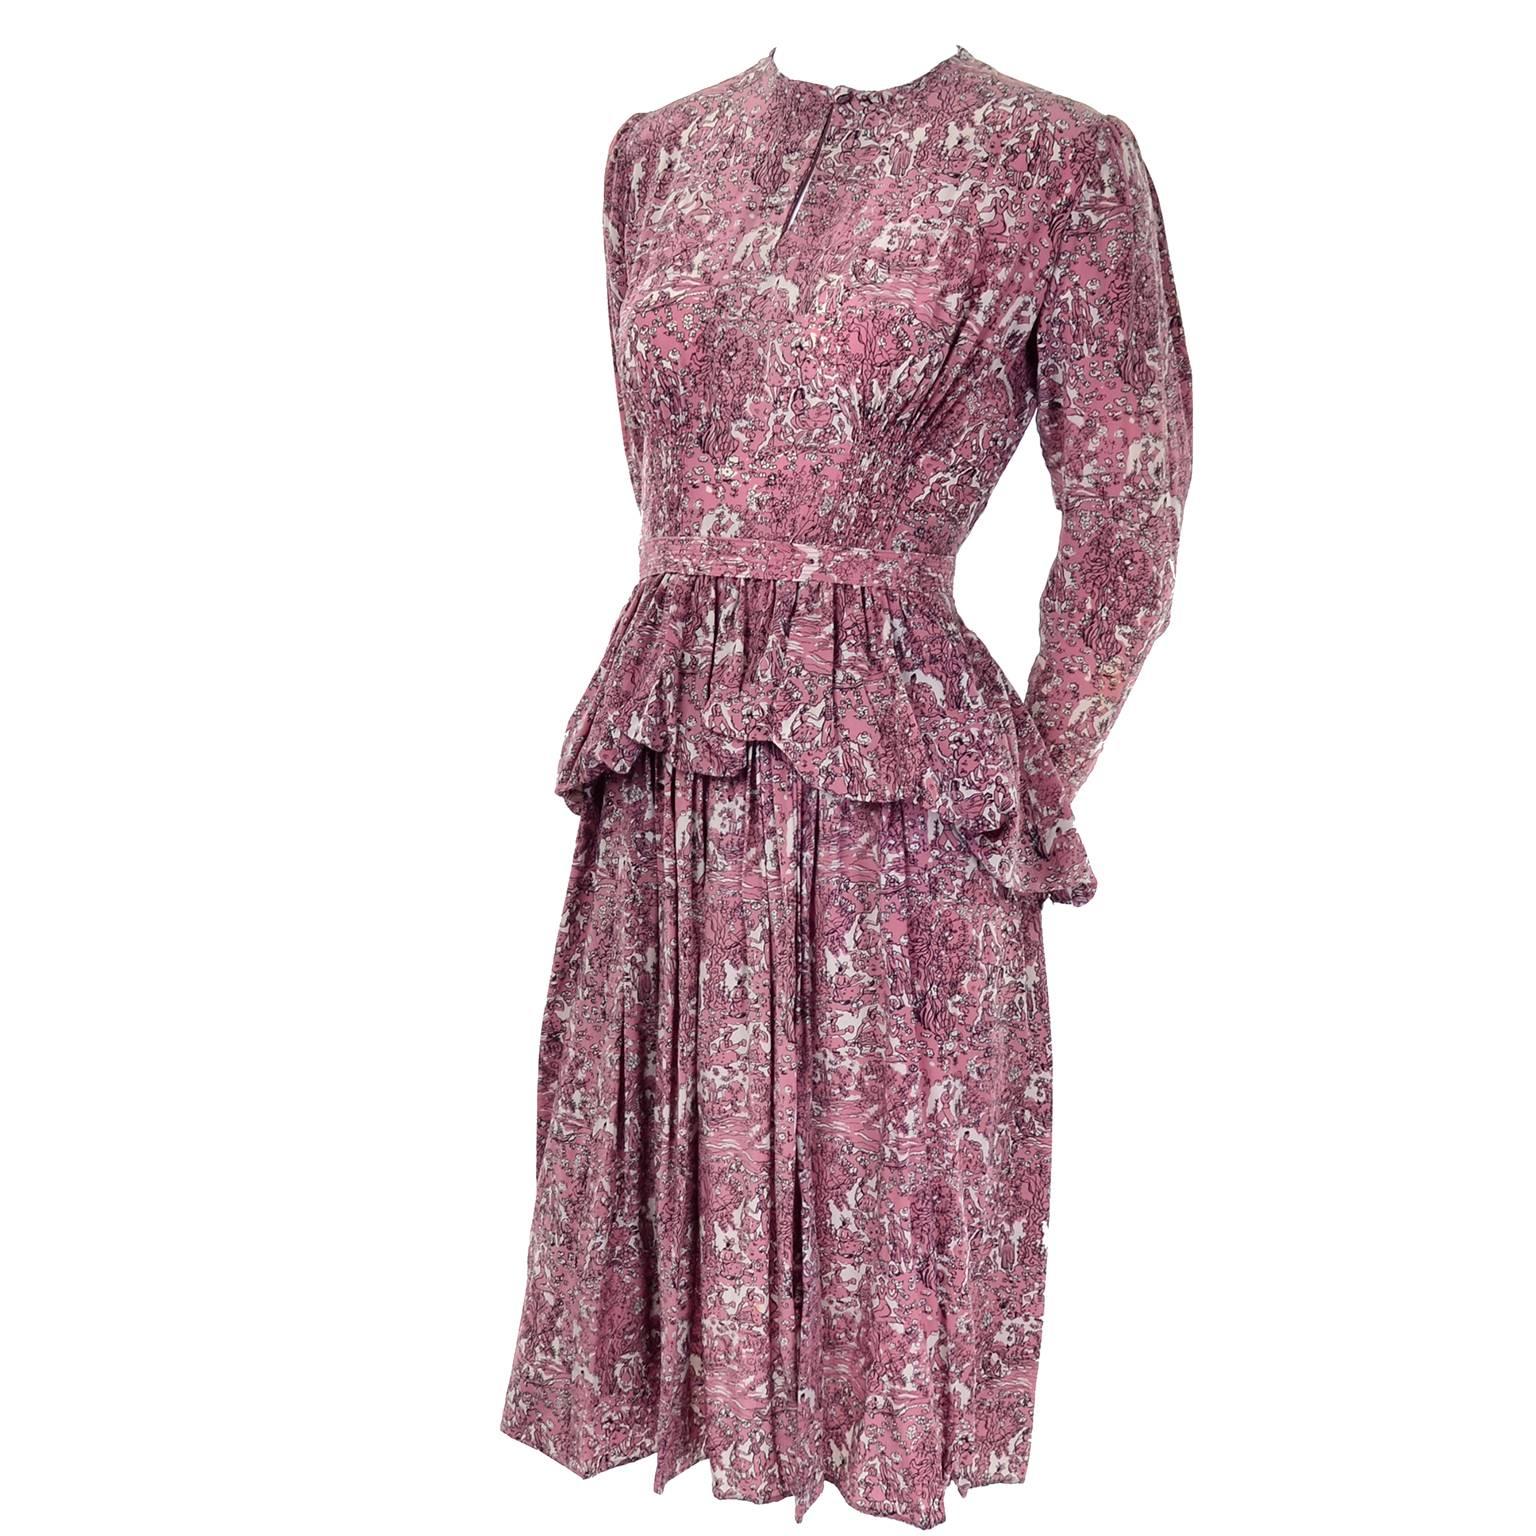 1940s Vintage Silk Dress in Rose Mauve Toile Novelty Print with Peplum